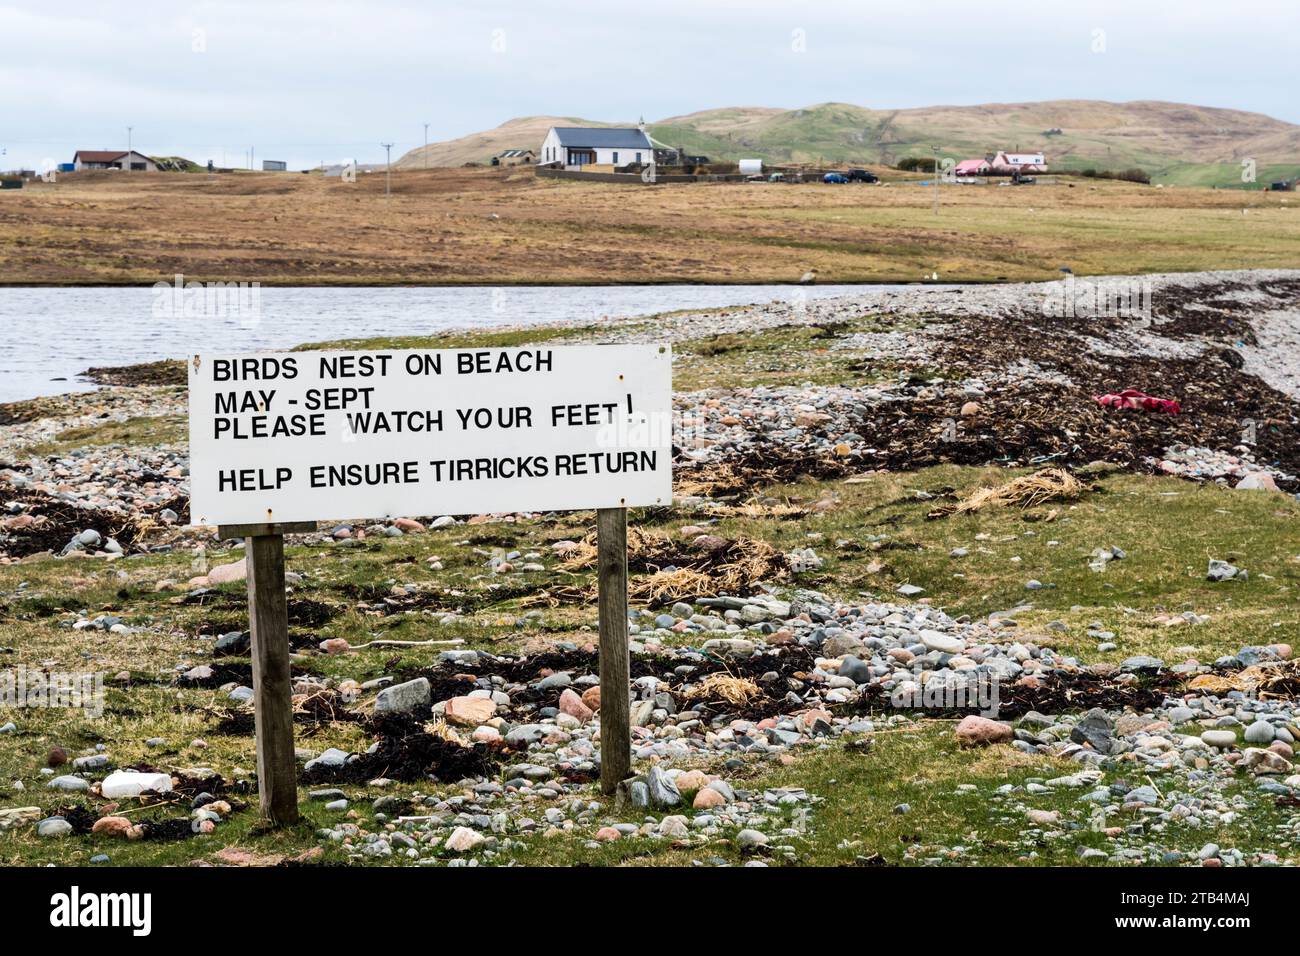 A sign in North Roe, Shetland warns people to be careful of Tirricks nesting on the beach.  Tirricks is the local Shetland word for Arctic Terns. Stock Photo